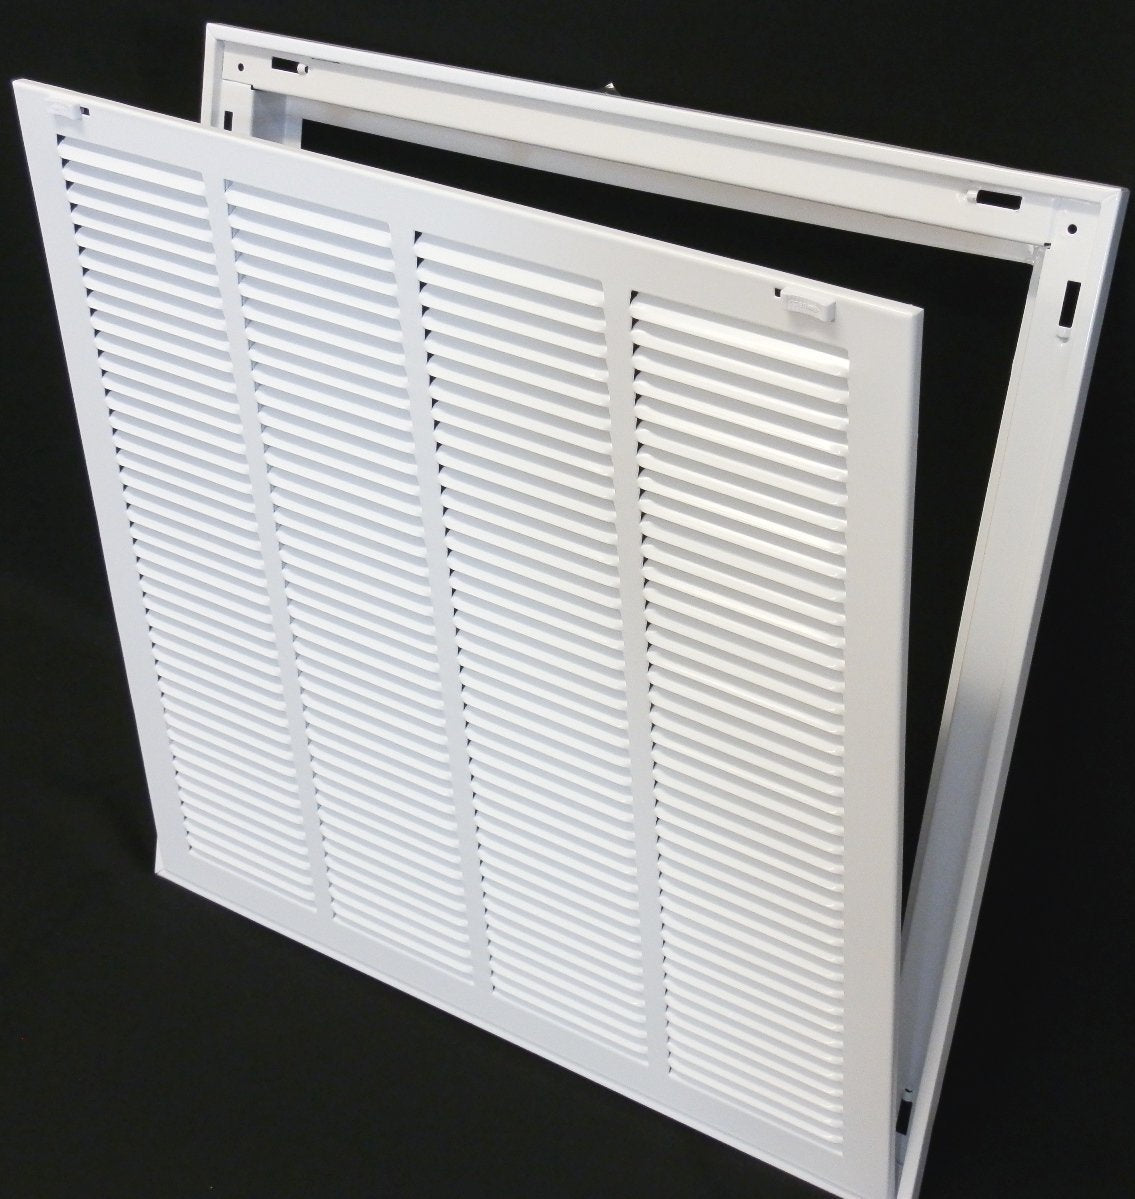 34&quot; X 34&quot; Steel Return Air Filter Grille for 1&quot; Filter - Removable Frame - [Outer Dimensions: 36 5/8&quot; X 36 5/8&quot;]